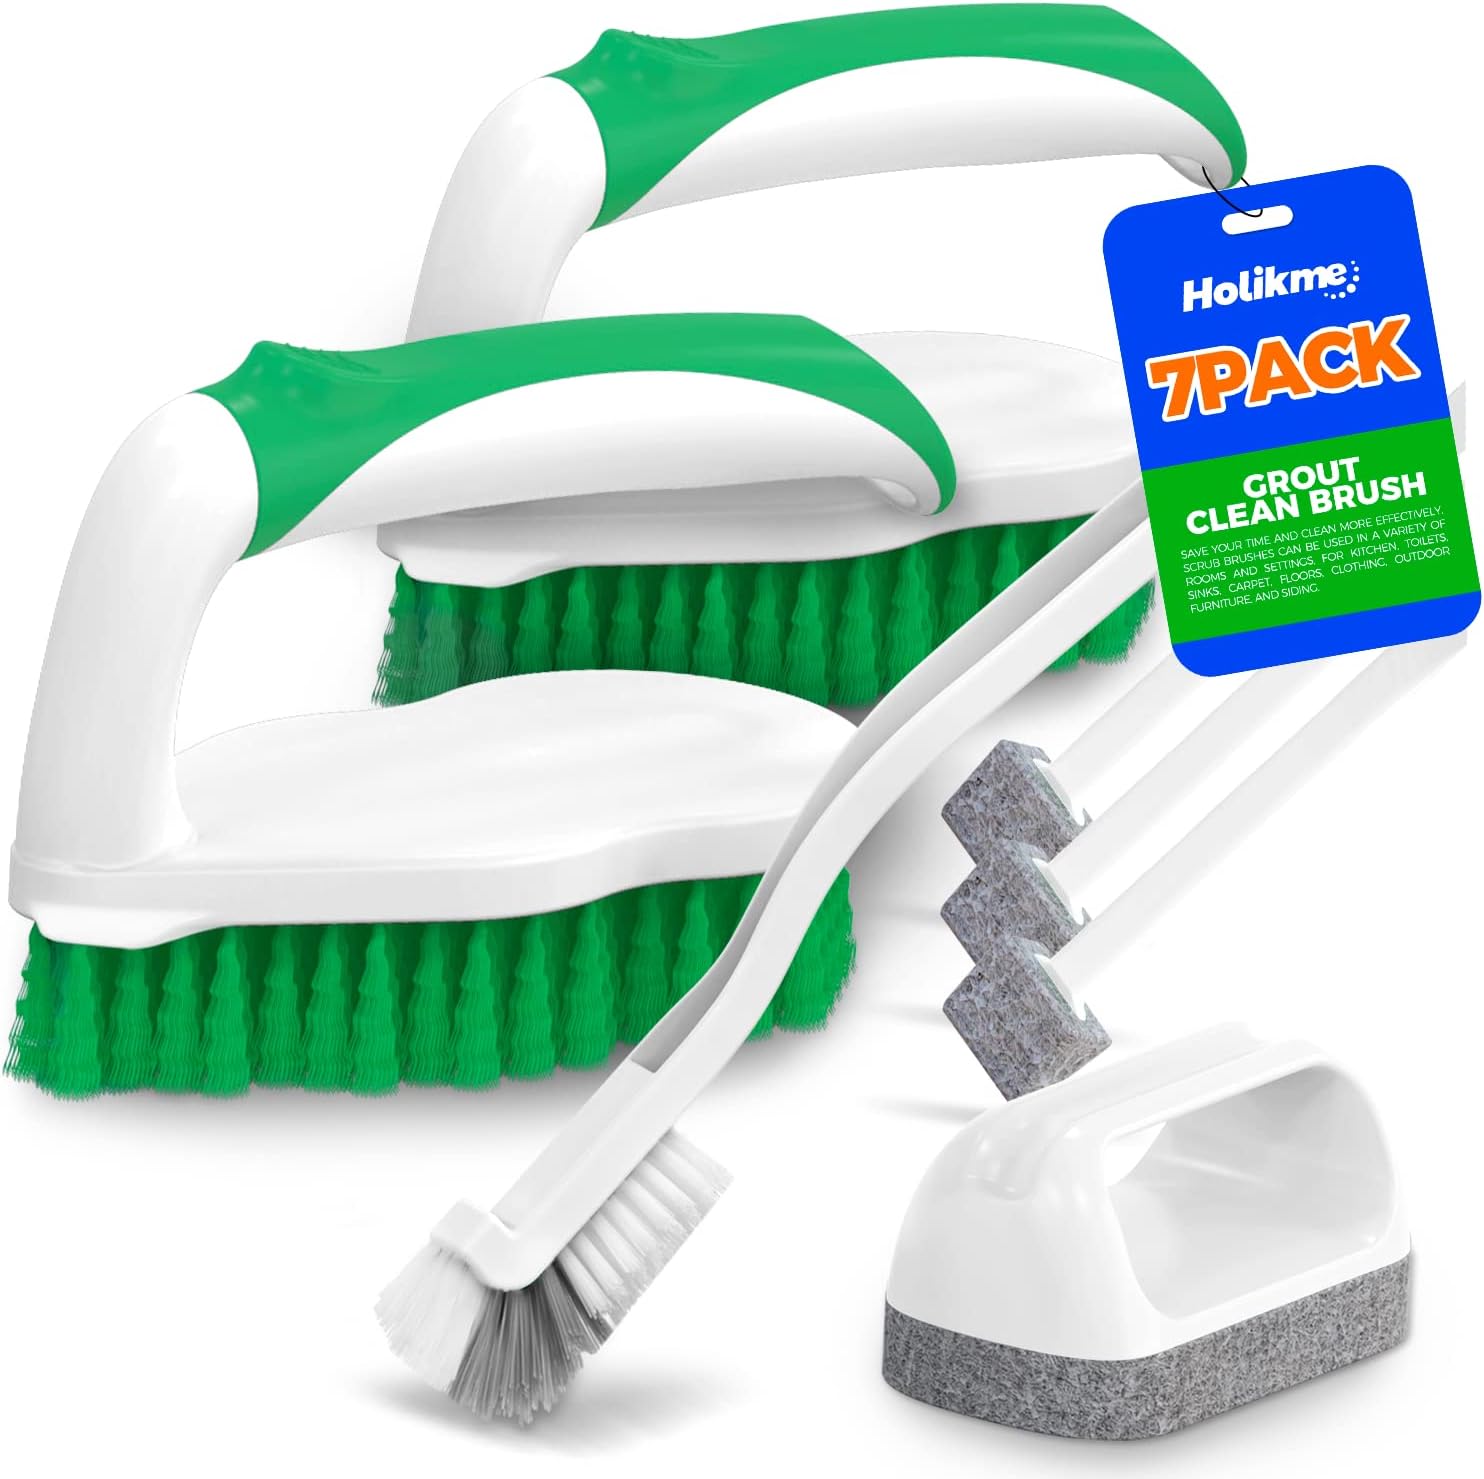 Holikme 7 Pack Deep Cleaning Brush Set,Clean [...]